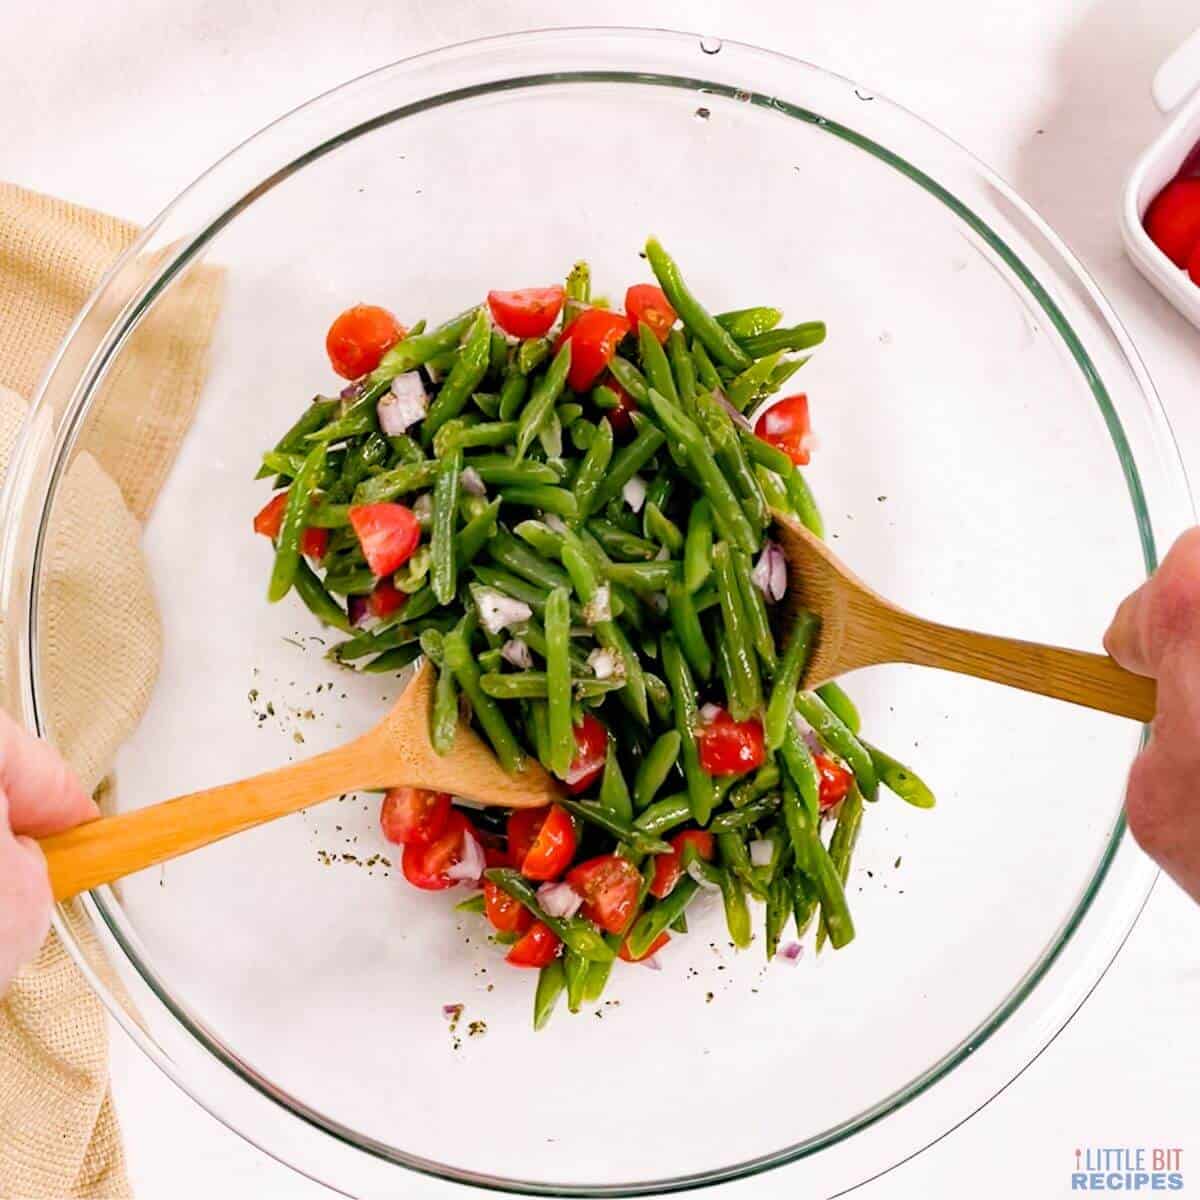 tossing the green bean tomato salad in glass mixing bowl.